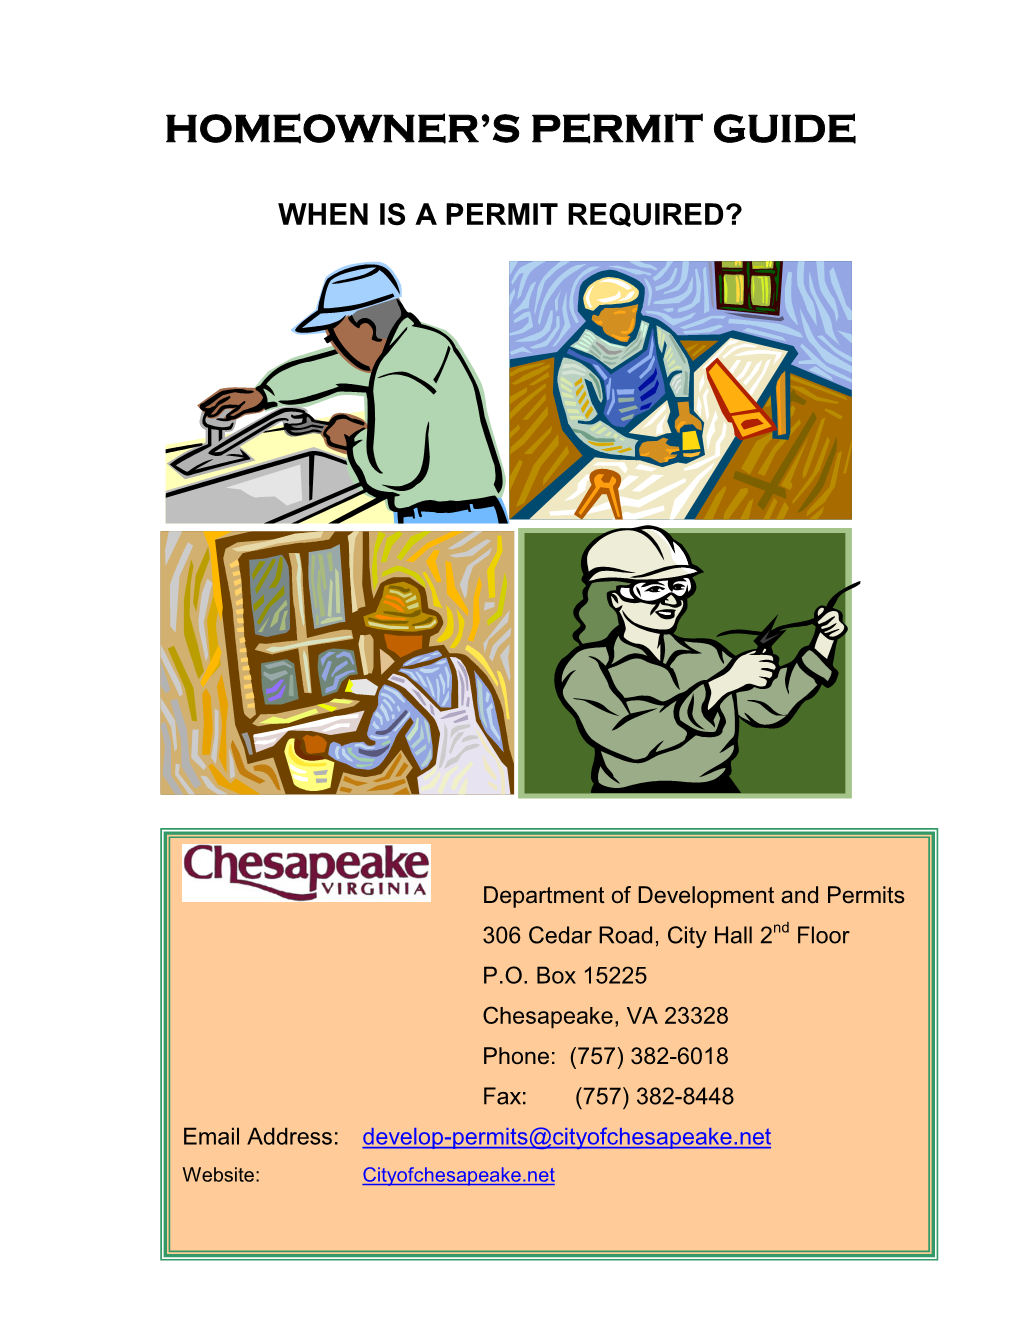 Homeowner's Permit Guide